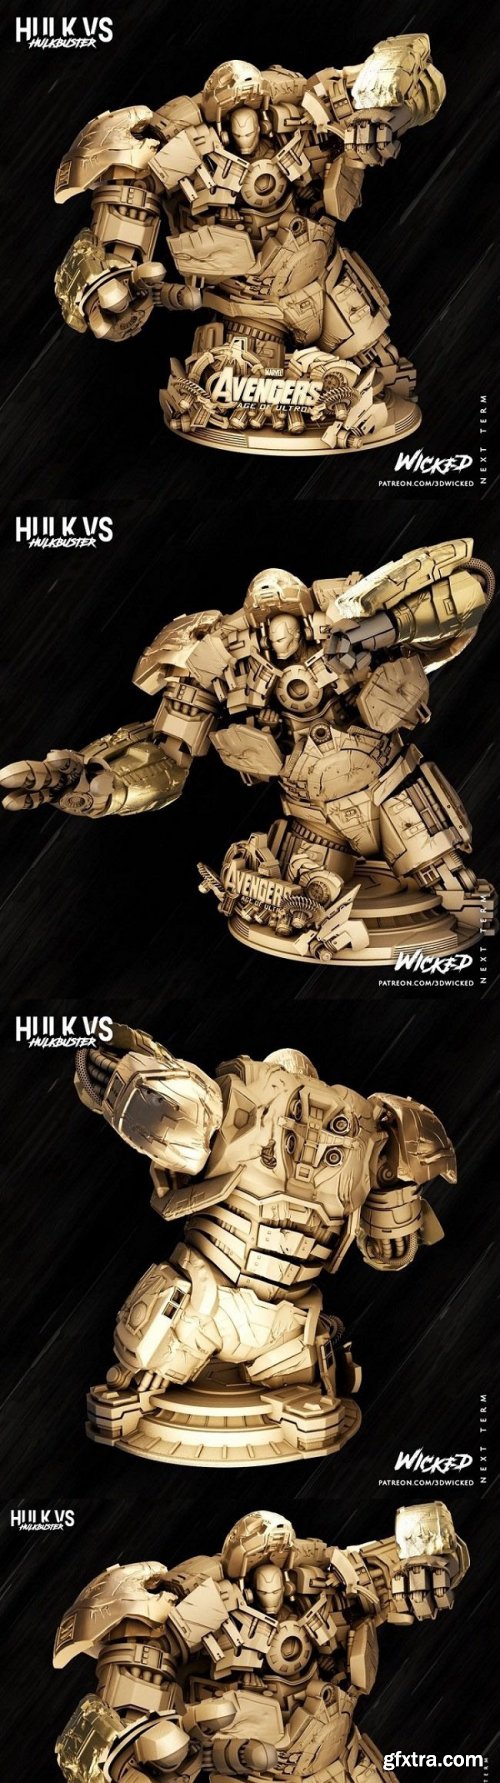 Wicked - Marvel - Hulkbuster - Age of Ultron